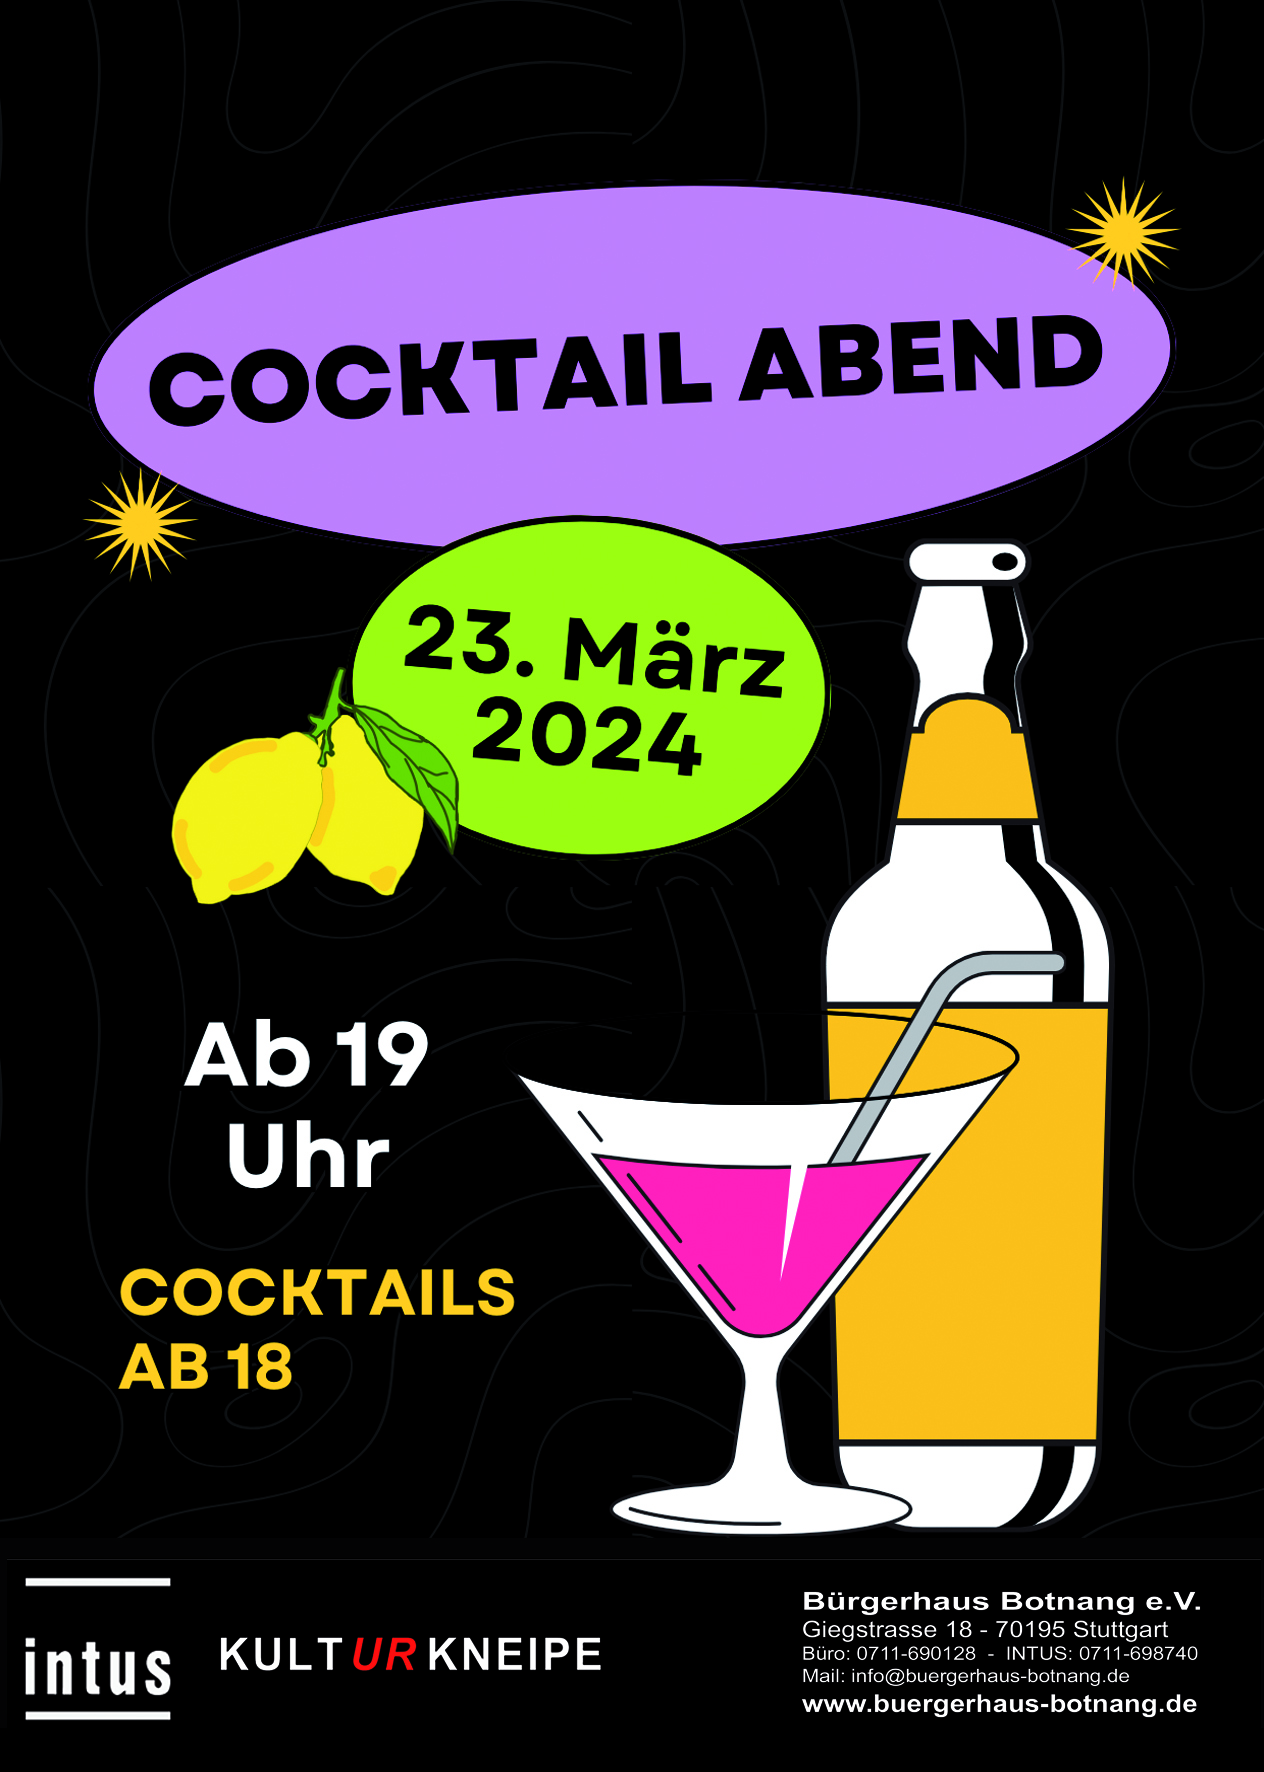 Cocktail-Abend